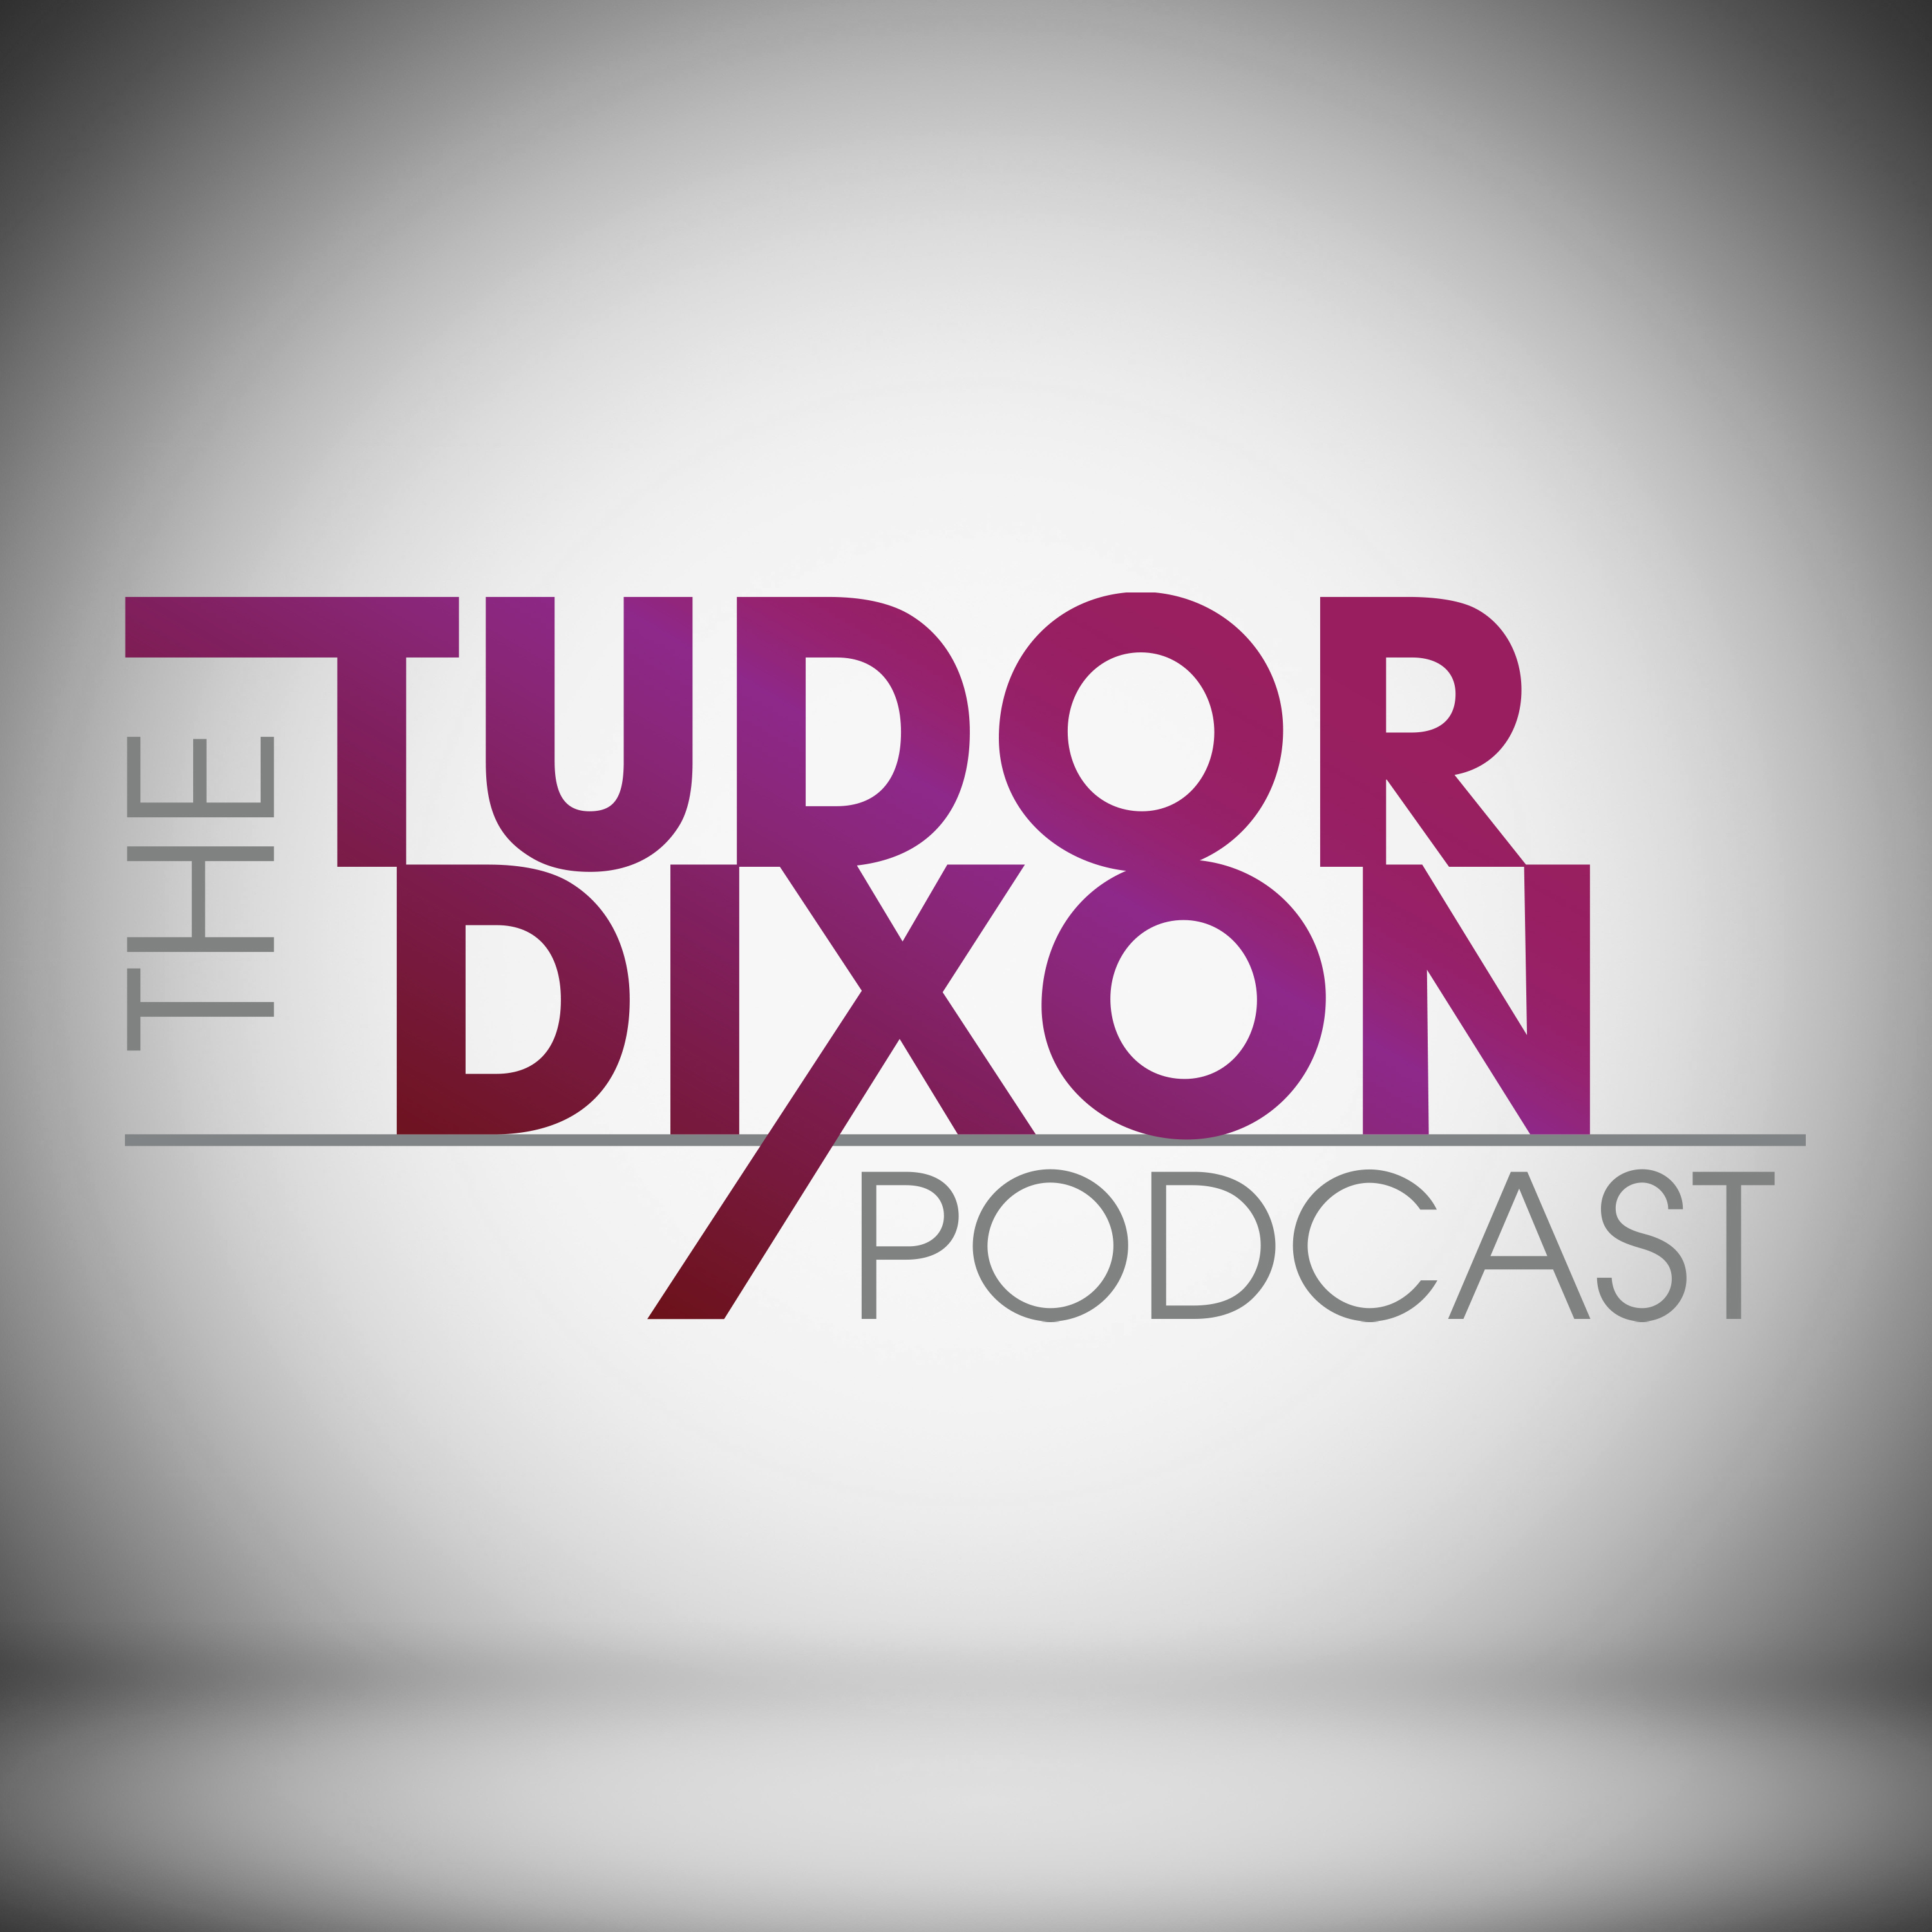 The Tudor Dixon Podcast: Saving Our Children with Tiffany Justice